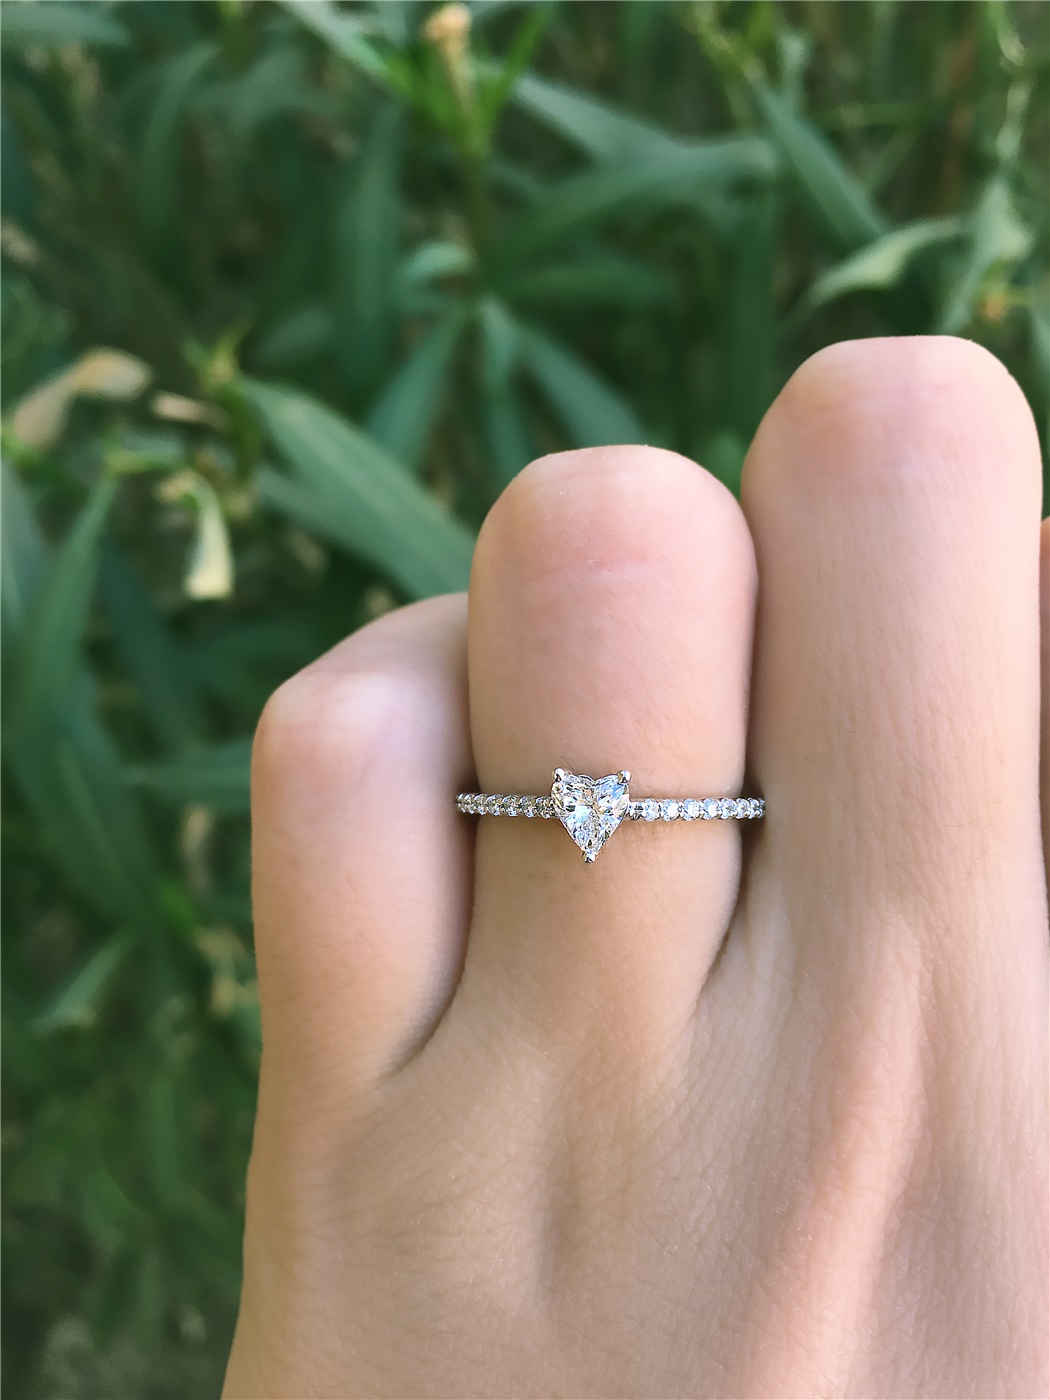 inexpensive heartbeat rings